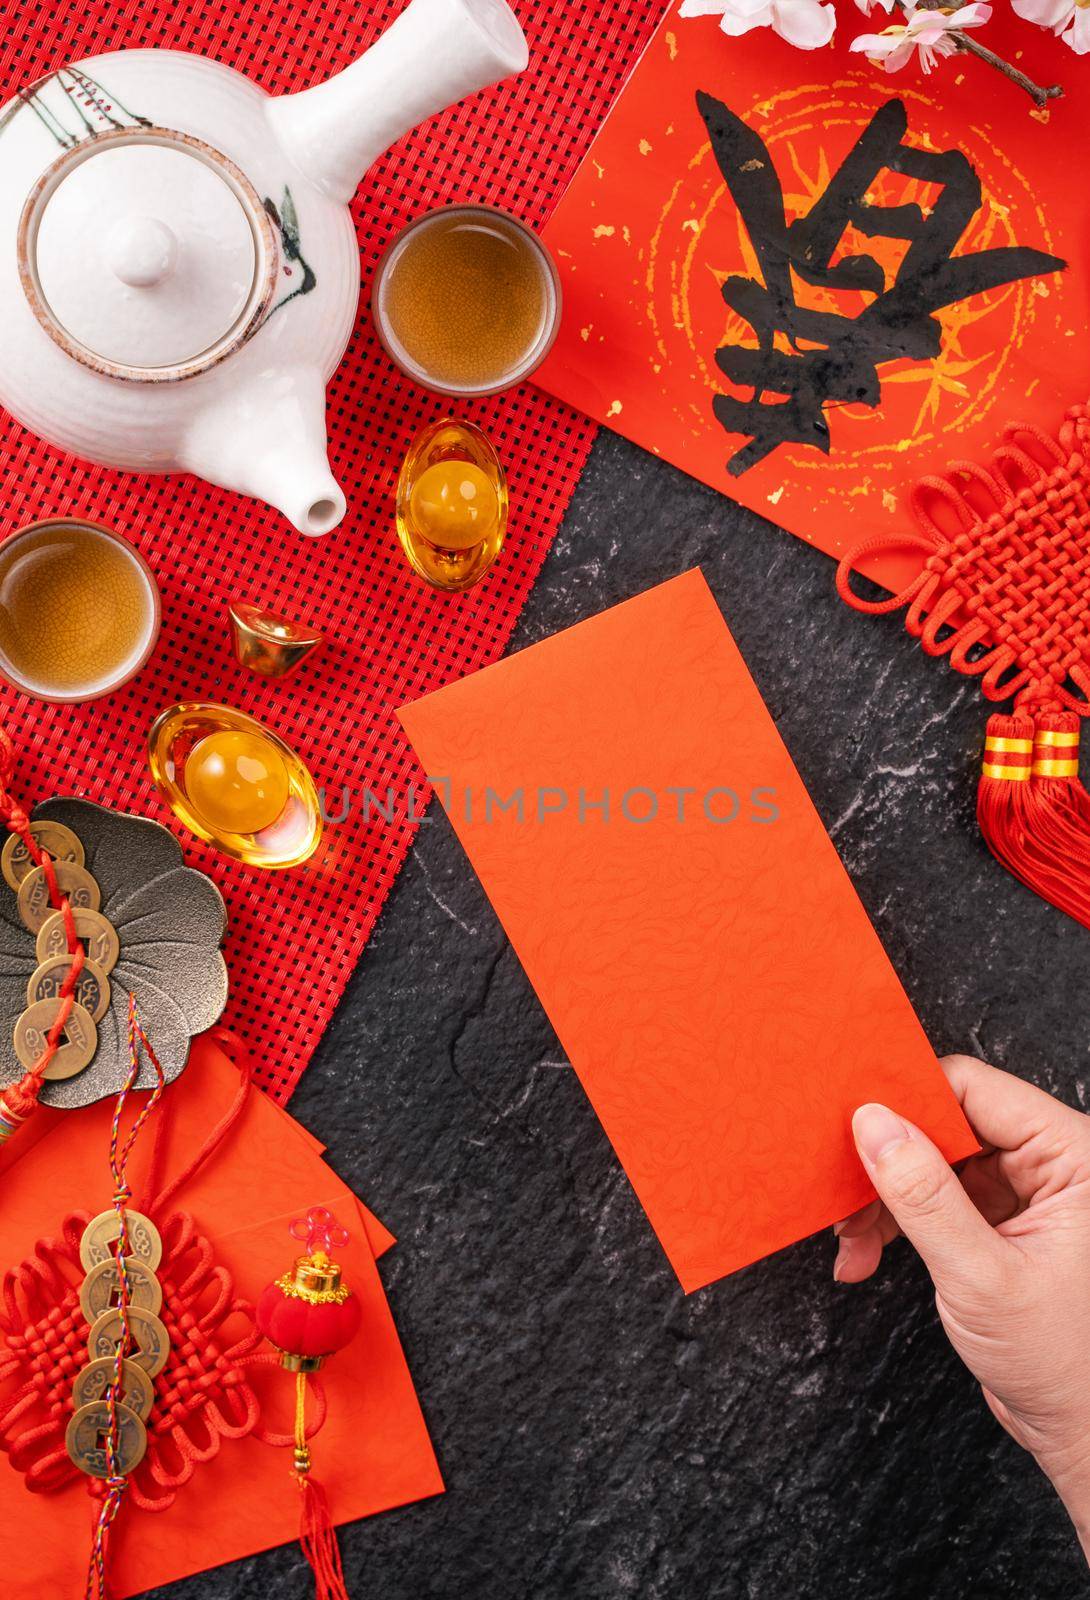 Design concept of Chinese lunar January new year - Woman holding, giving red envelopes (ang pow, hong bao) for lucky money, top view, flat lay, overhead above. The word 'chun' means coming spring. by ROMIXIMAGE